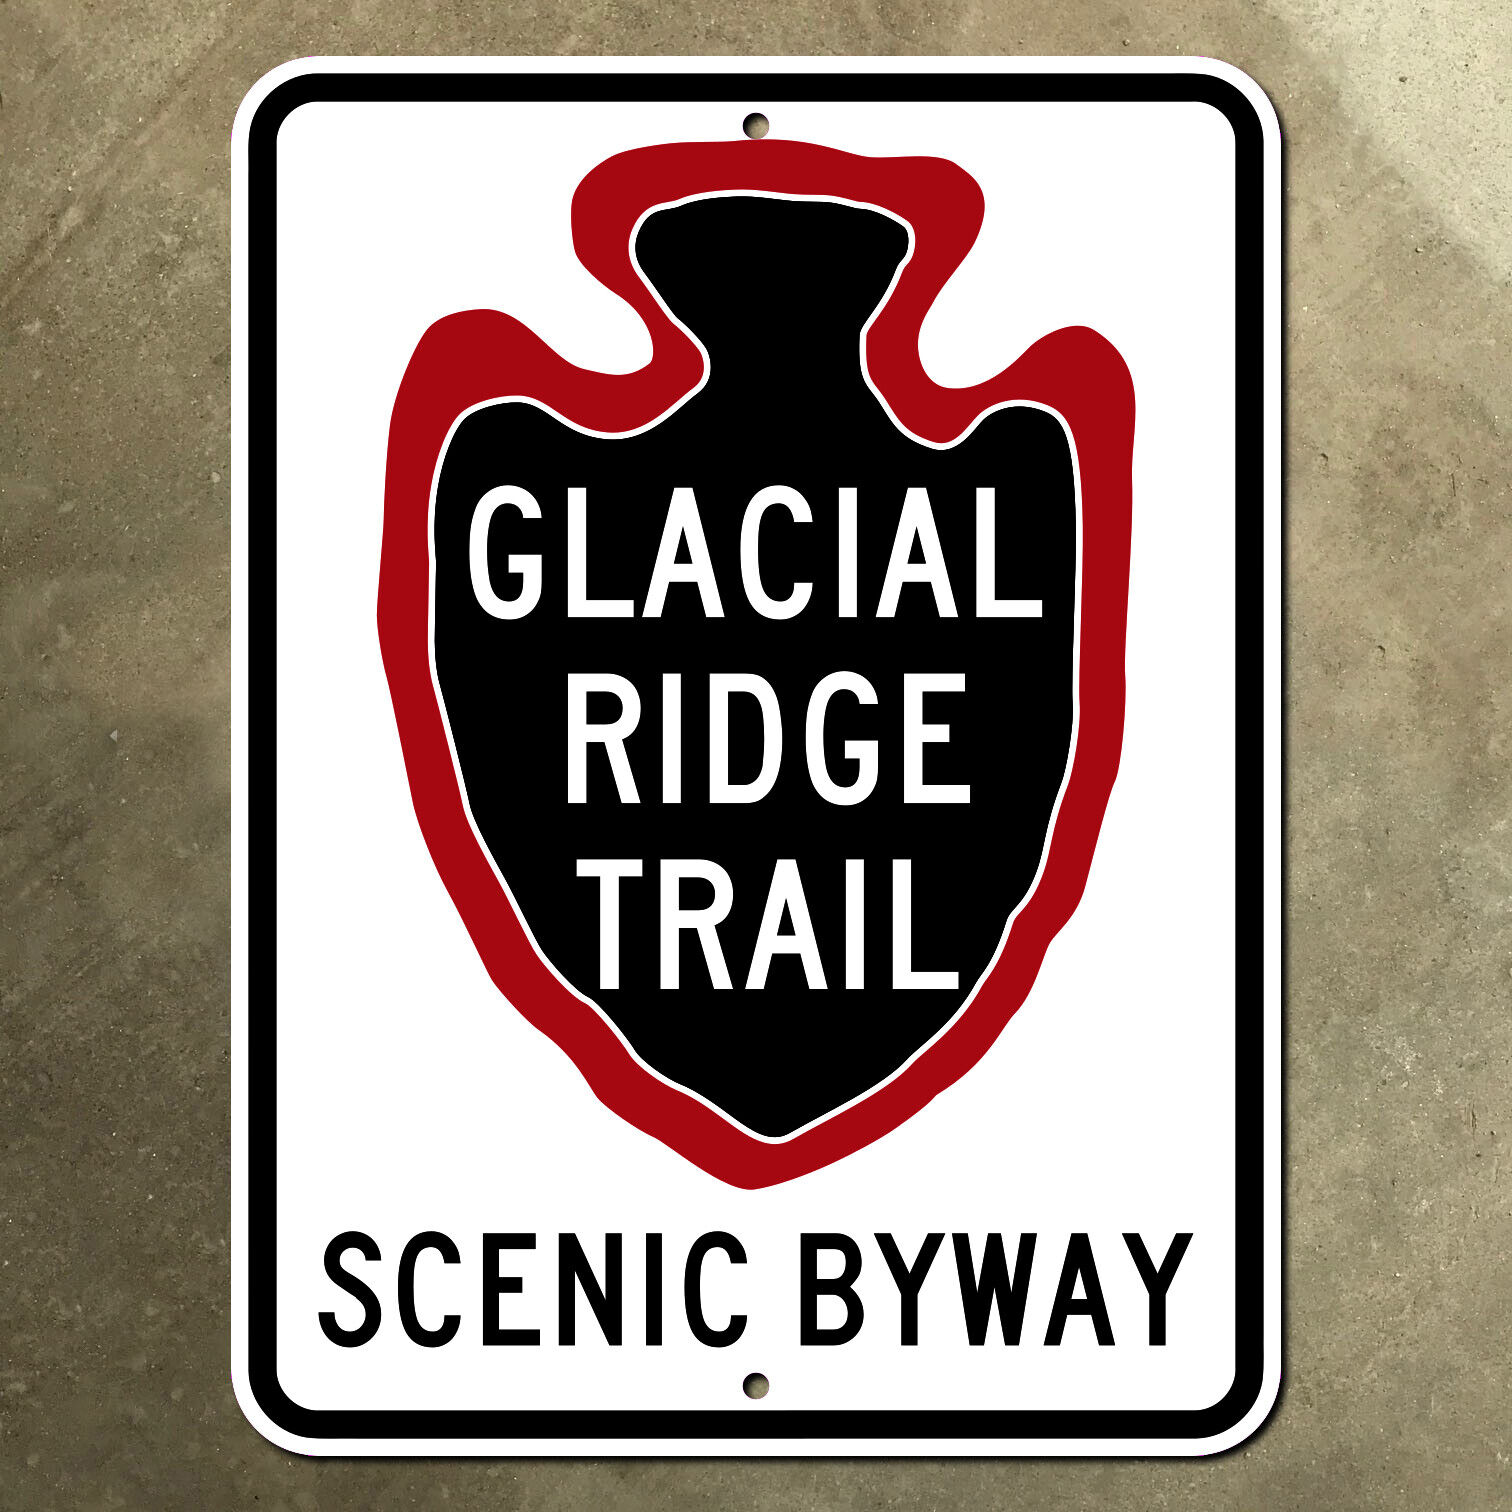 Minnesota Glacial Ridge Trail route marker highway road sign 1990s scenic 15x20